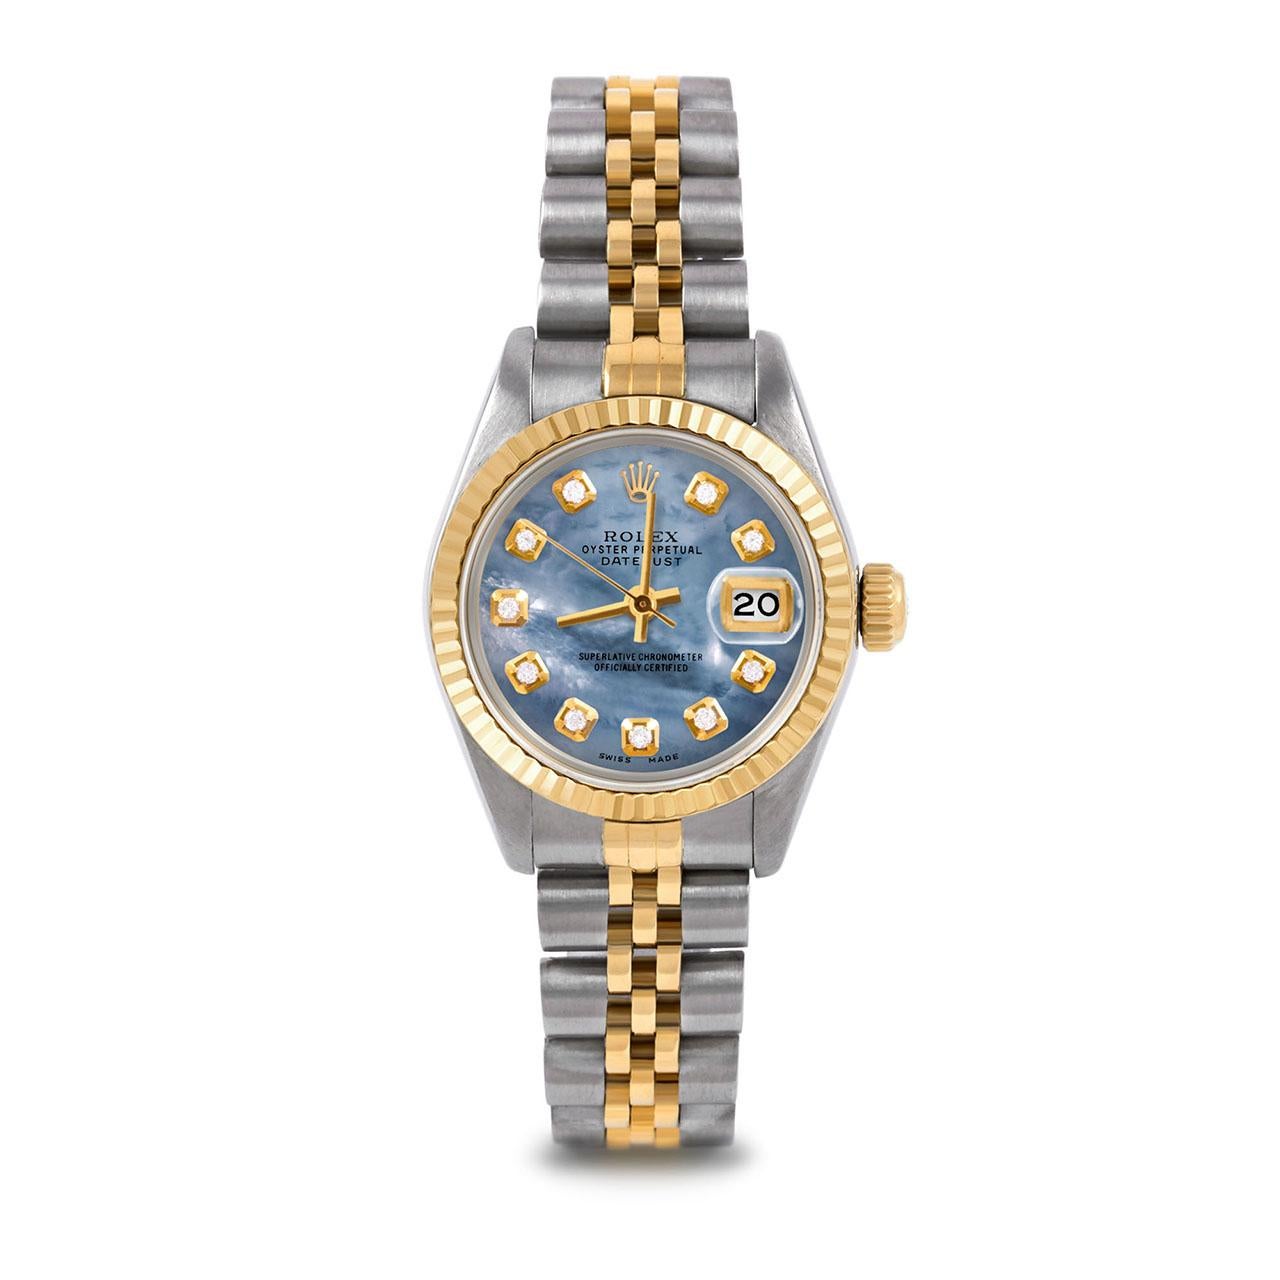 Montre Rolex 6917 Ladies 26mm Two Tone Datejust Watch, Custom Blue Mother of Pearl Diamond Dial & Fluted Bezel on Rolex 14K Yellow Gold and Stainless Steel Jubilee Band.   

SKU 6917-TT-BLMOP-DIA-AM-FLT-JBL


Marque/Modèle :        Rolex